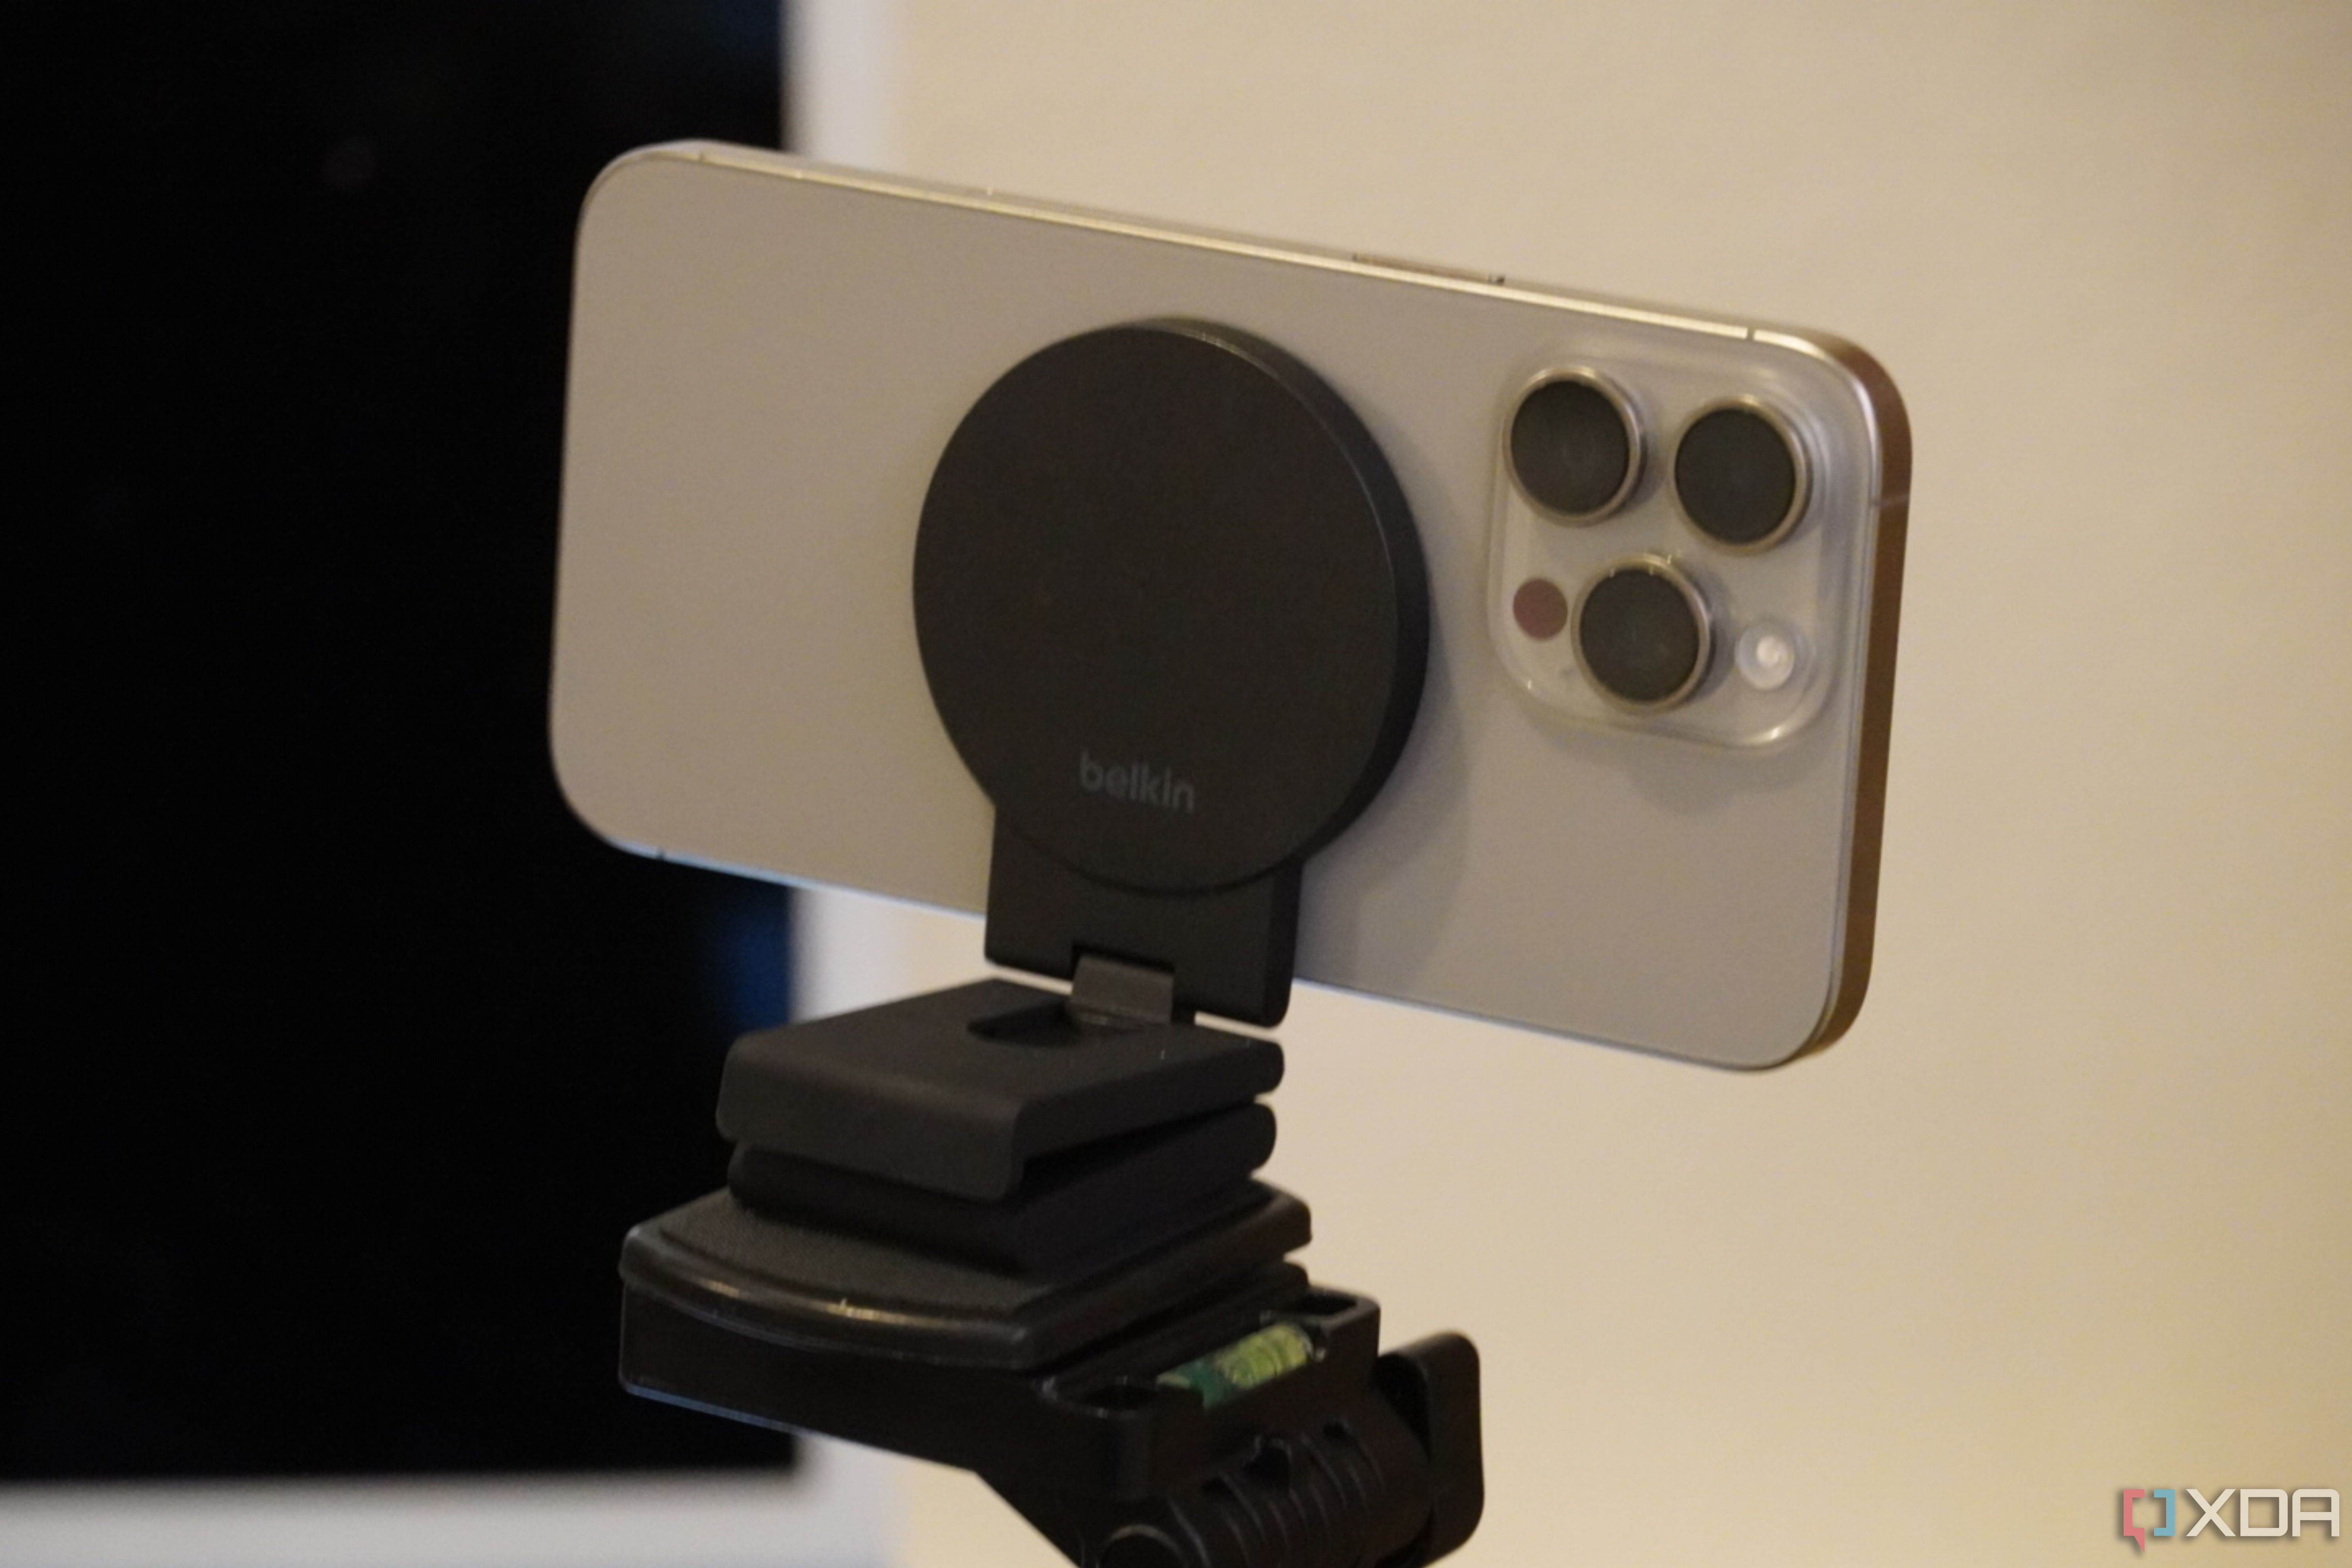 The sliders on the Belkin Continuity Camera mount.